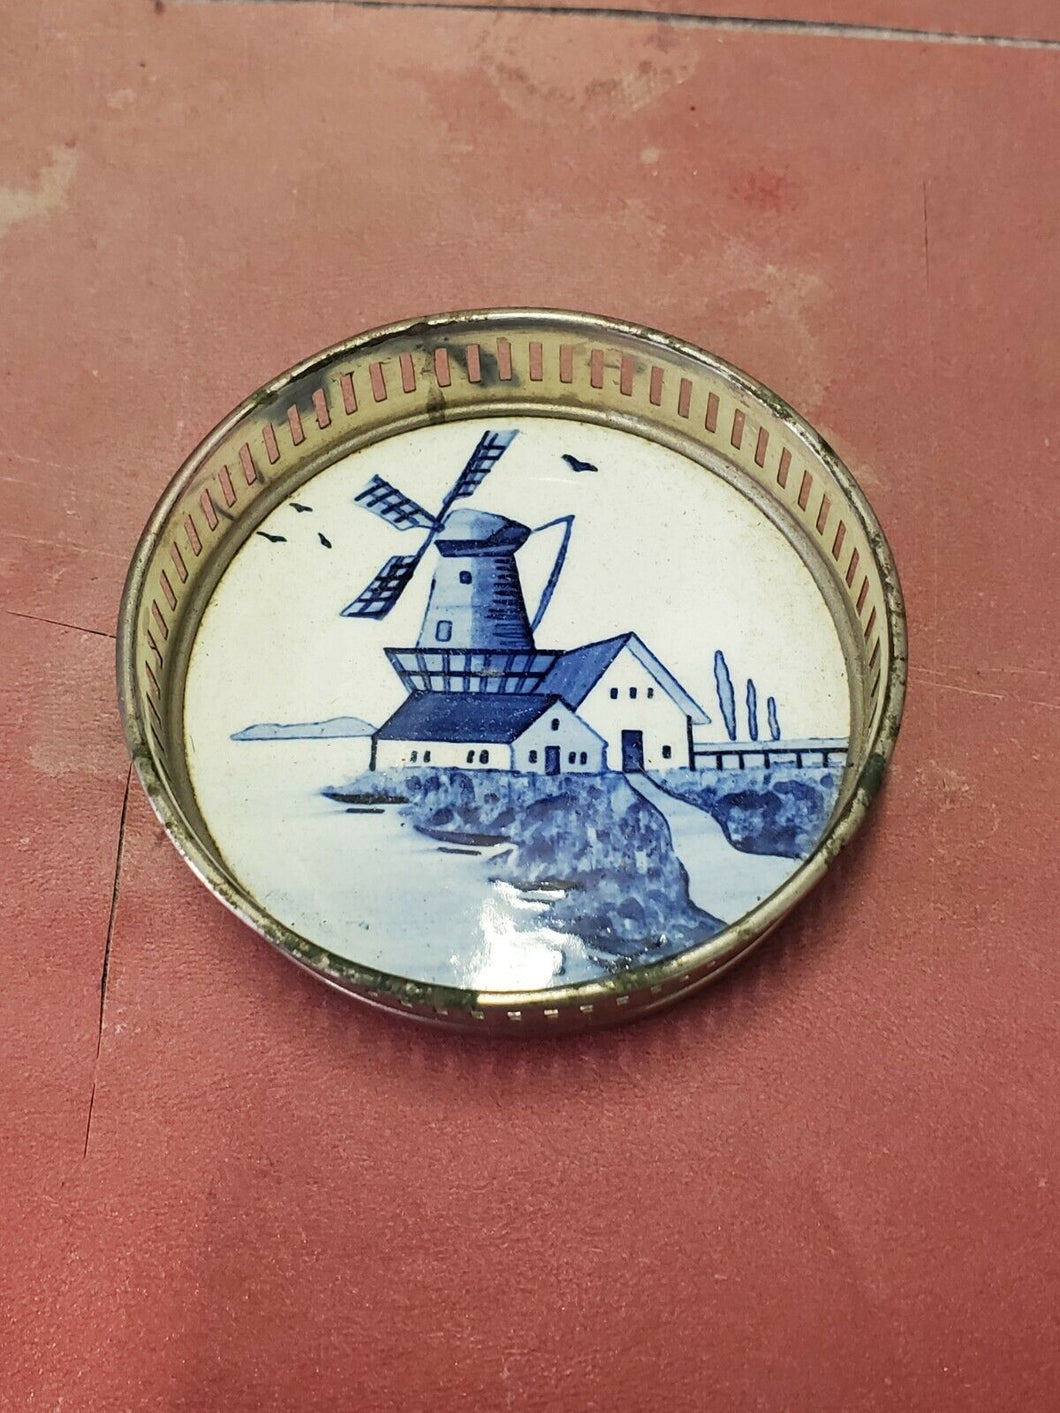 Vintage Delft Germany Porcelain & Metal Round Coaster Blue Hand Painted Windmill